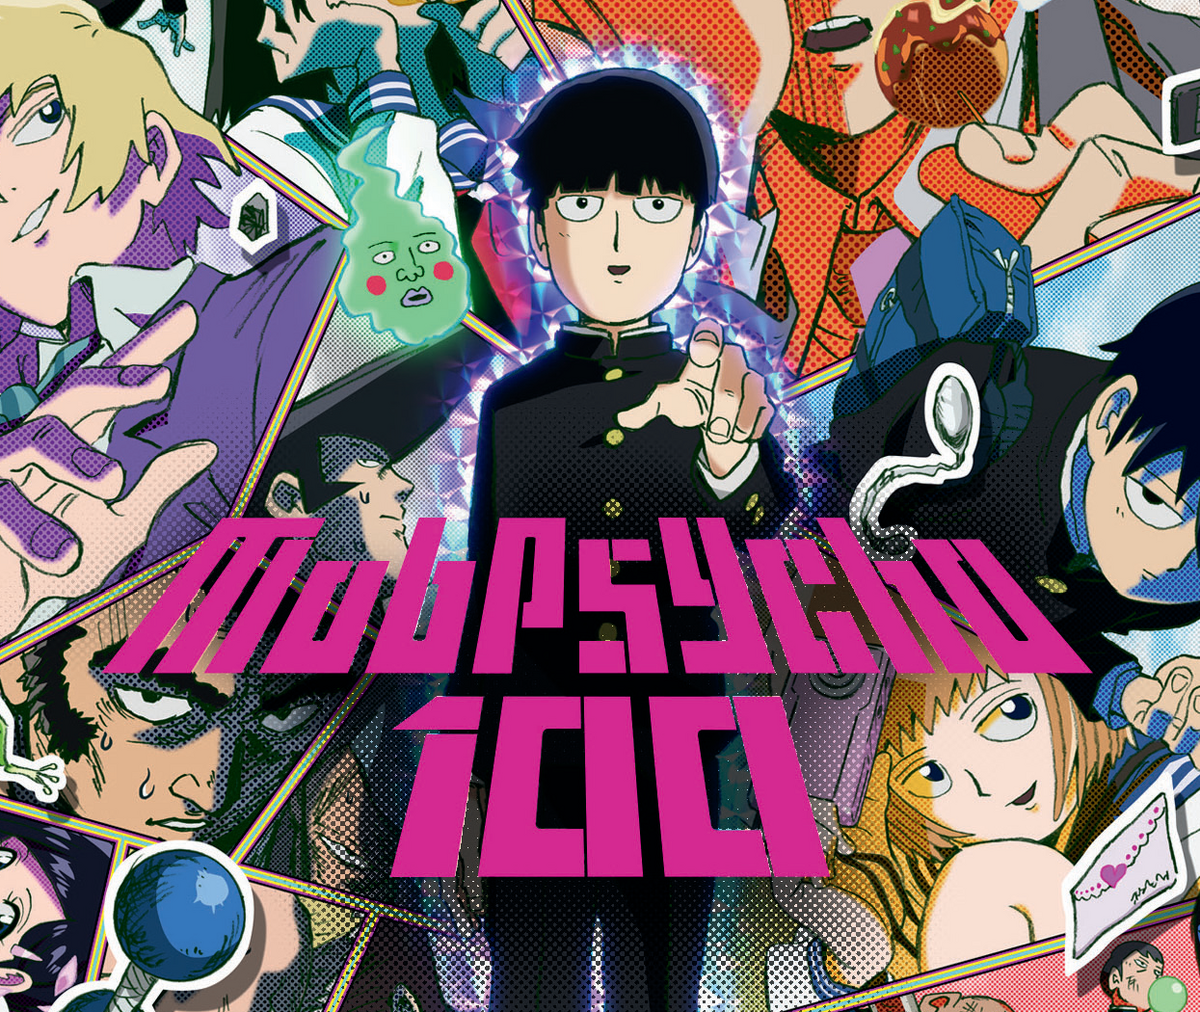 Mob Psycho Season 3 Episode 7 Release Date & Time